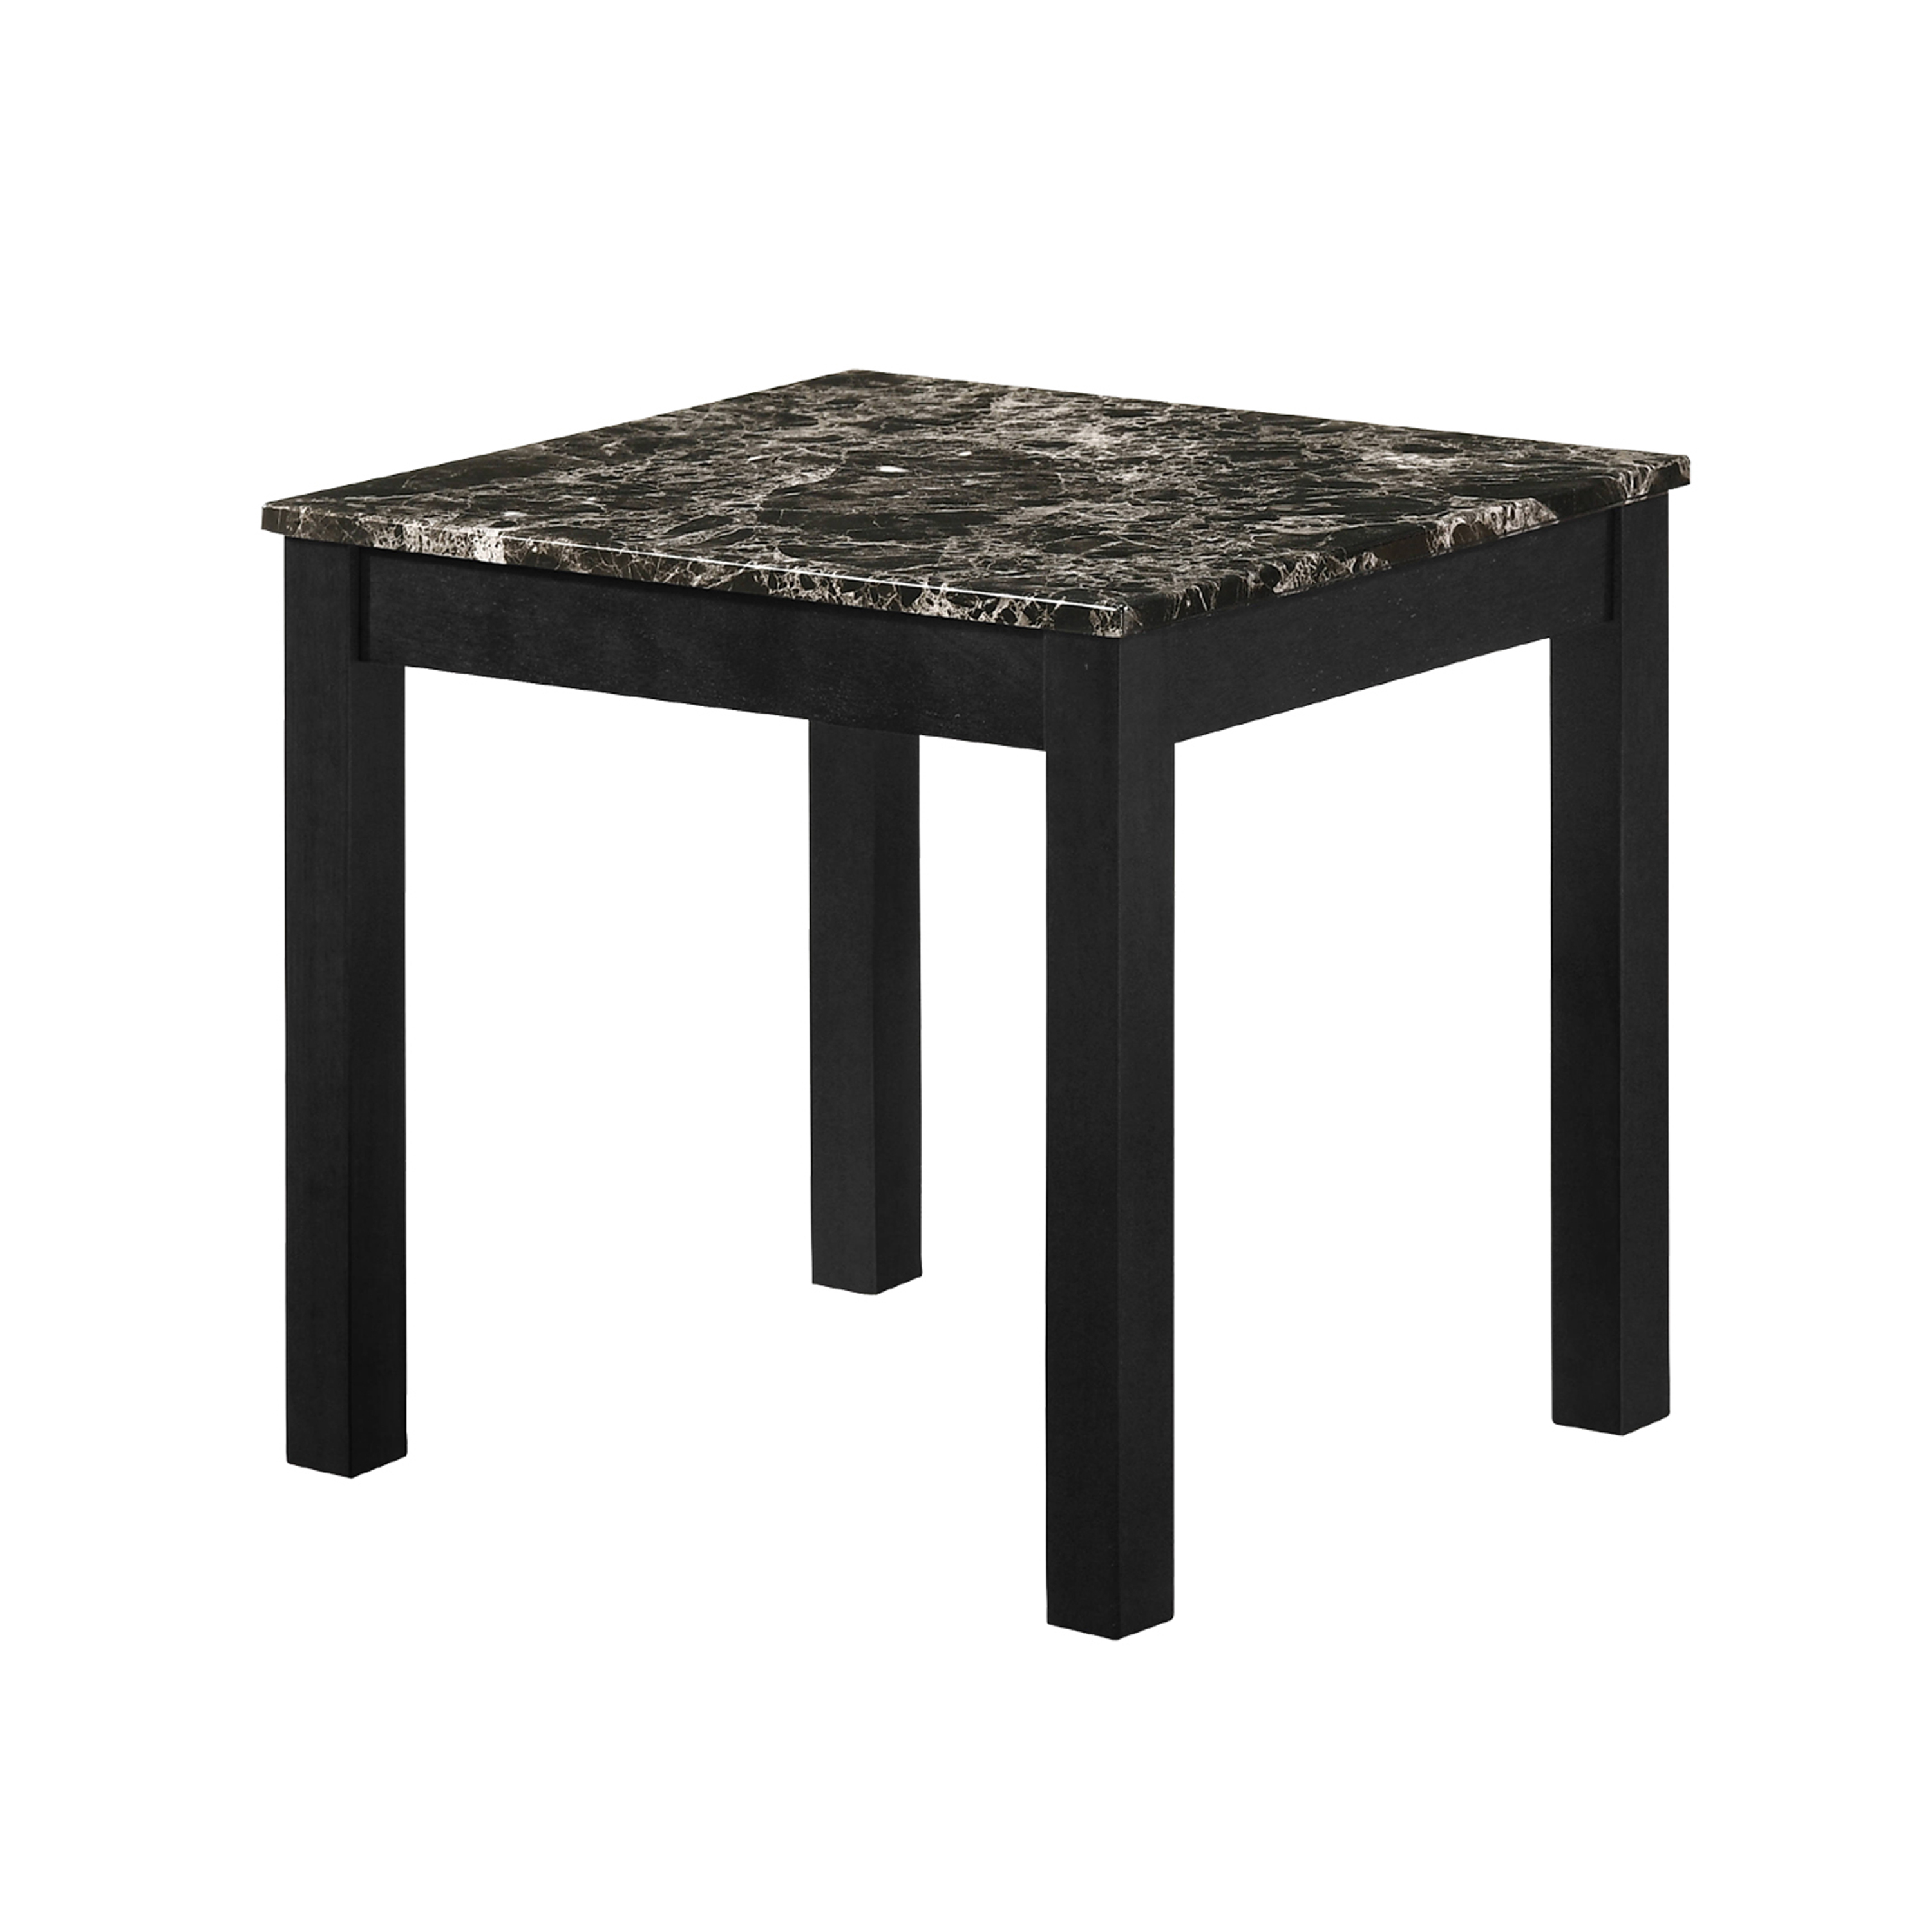 3 Piece Marble Top Cocktail And End Table With Block Legs, Black- Saltoro Sherpi